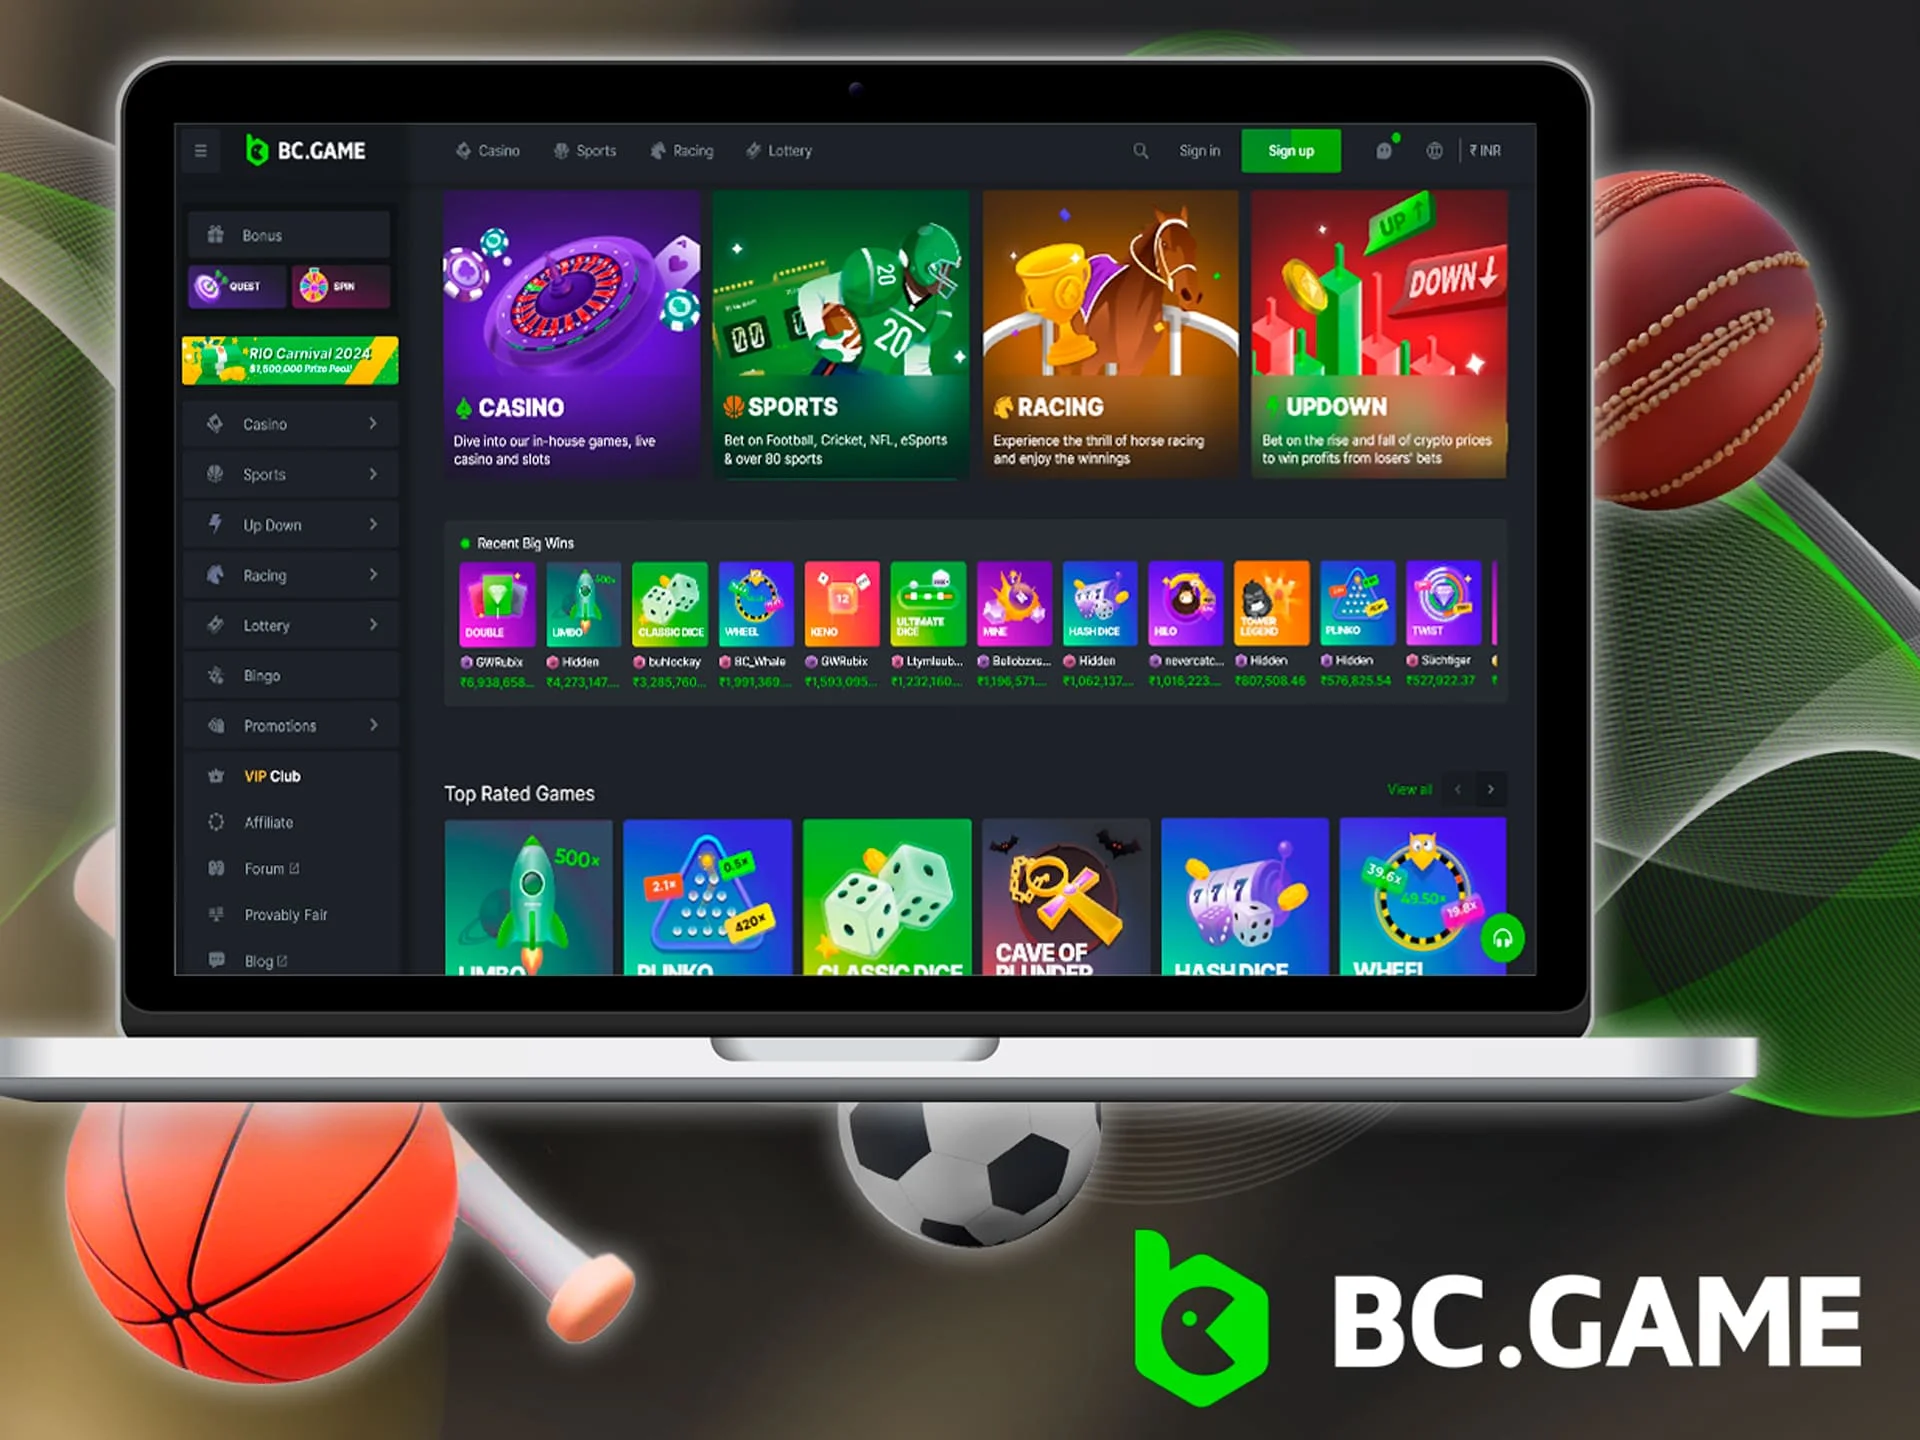 Place bets and play casino games using the browser version of the BC Game Casino site for PC.